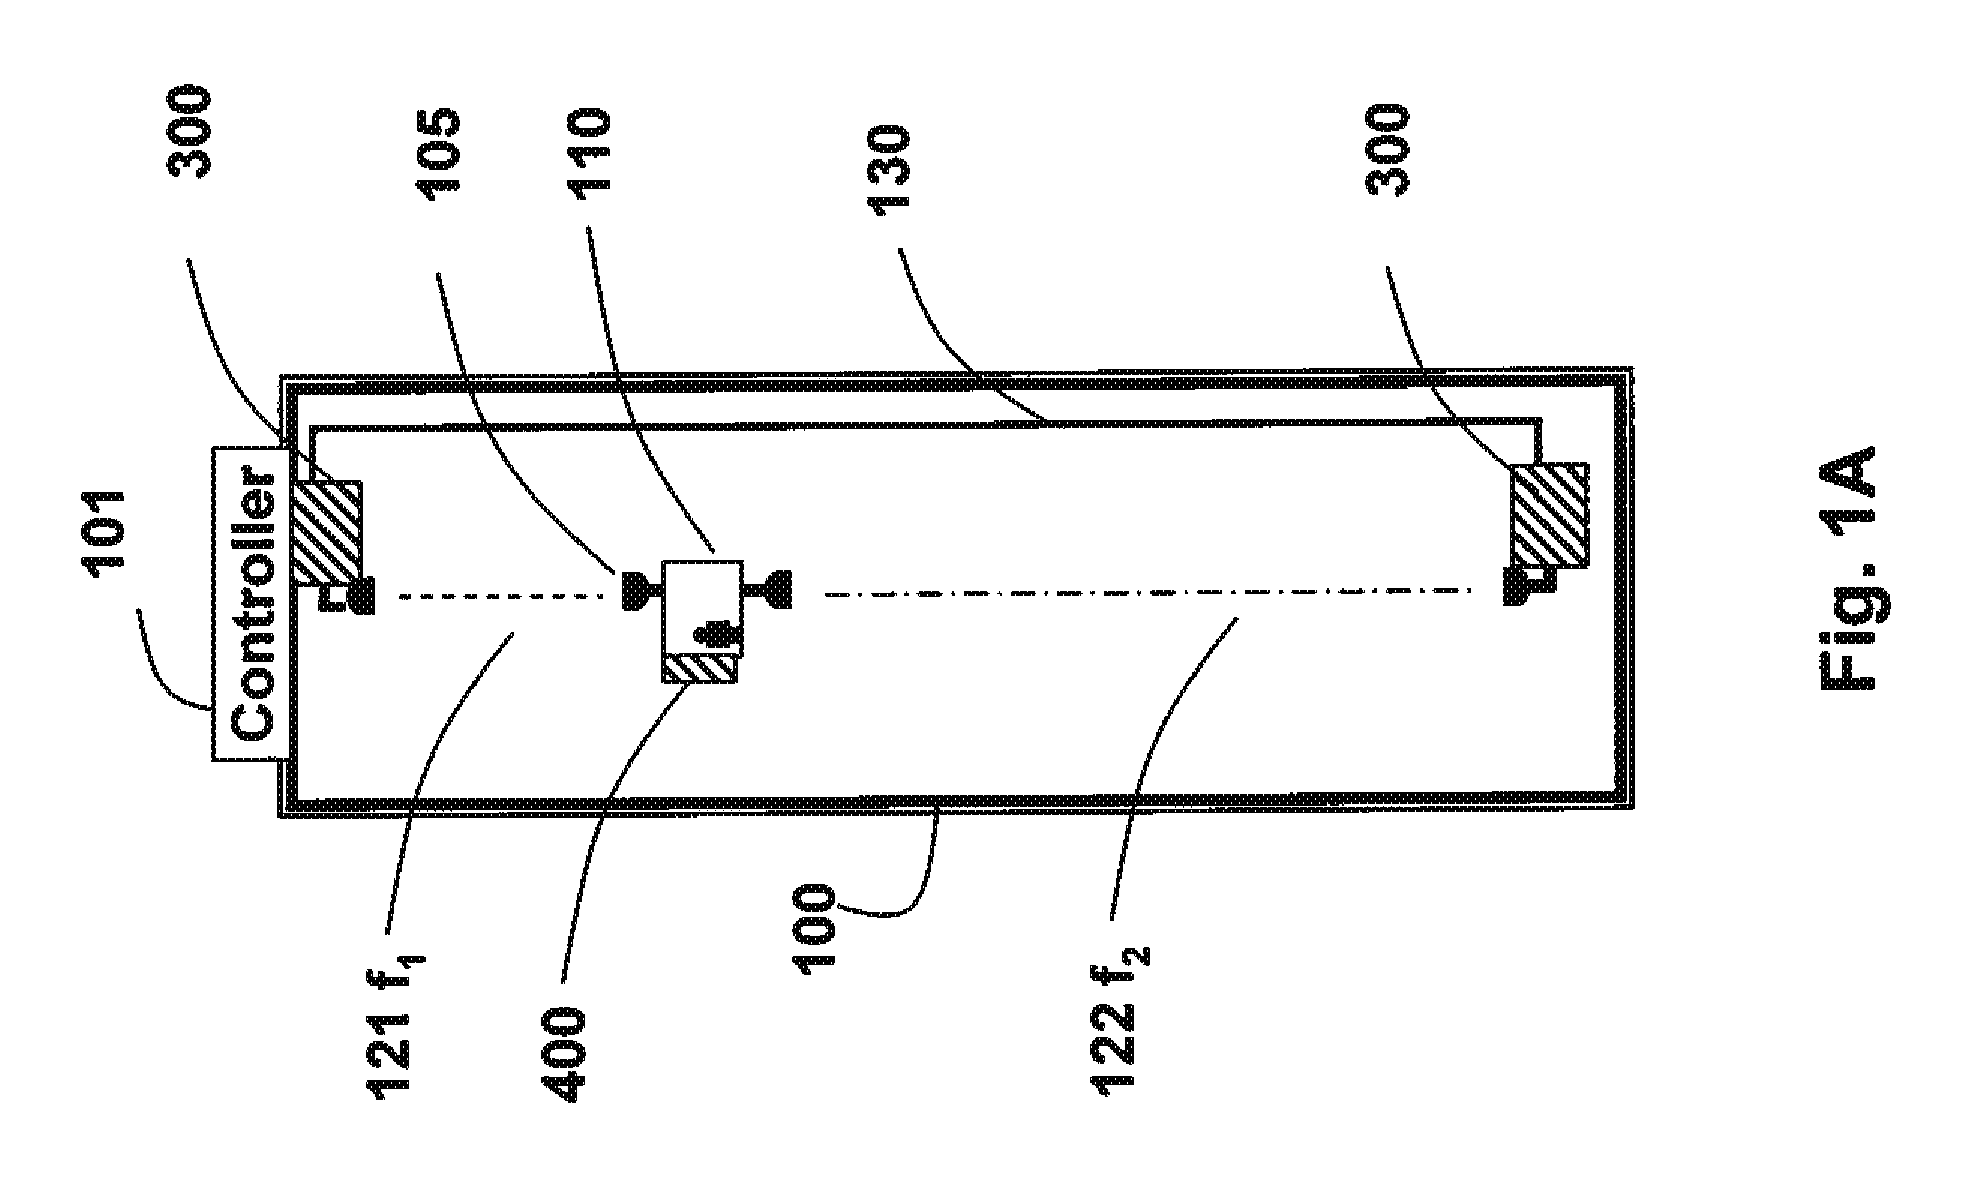 Wireless Communication Network for Transportation Safety Systems